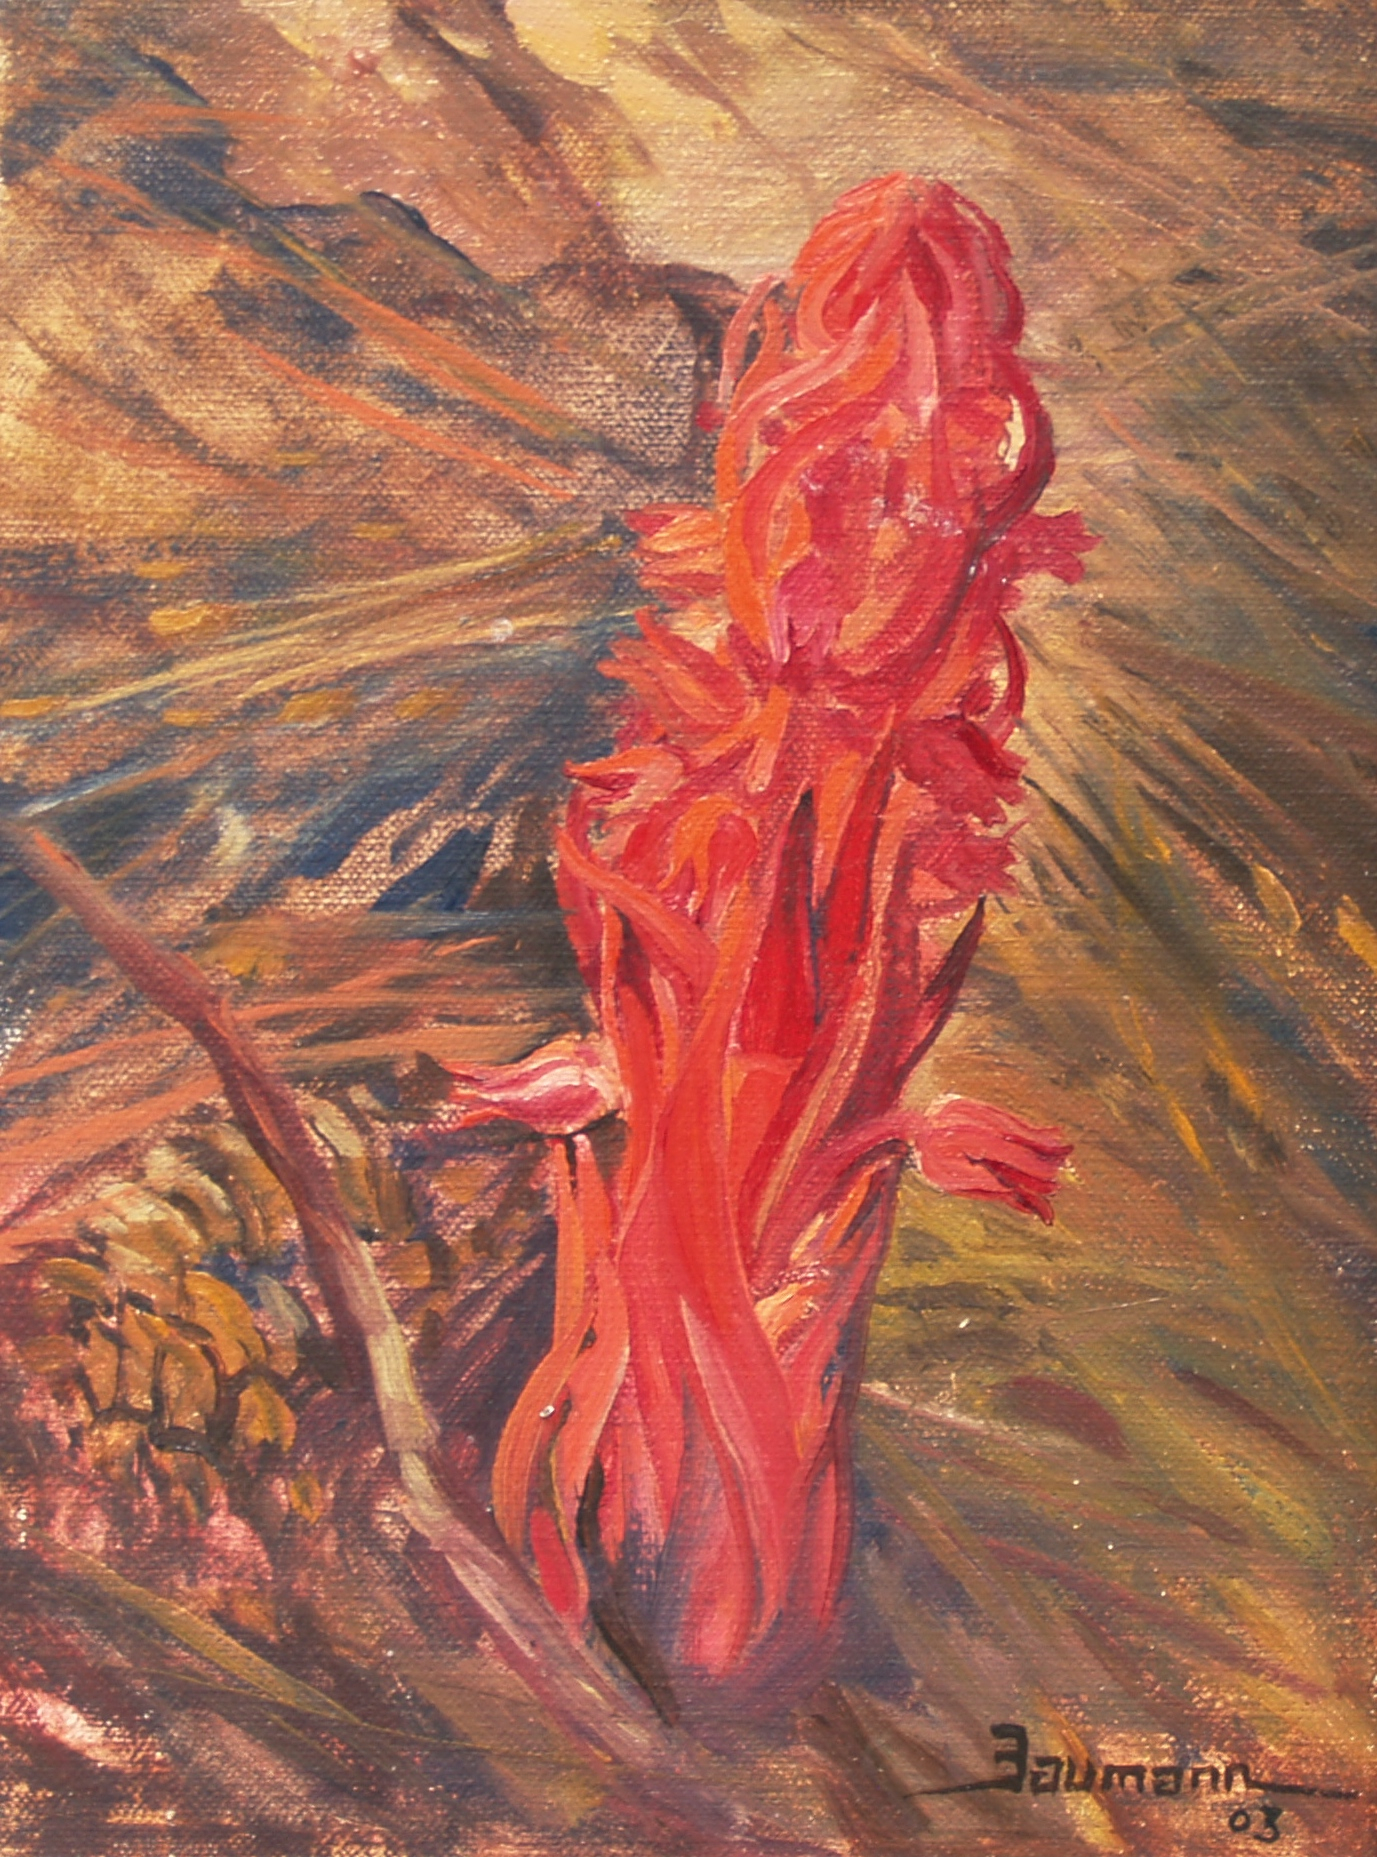 This oil painting is a study of a California Snow Flower by Stefan Baumann showing the red color and exotic shape of this unique flower that blooms through the snow.